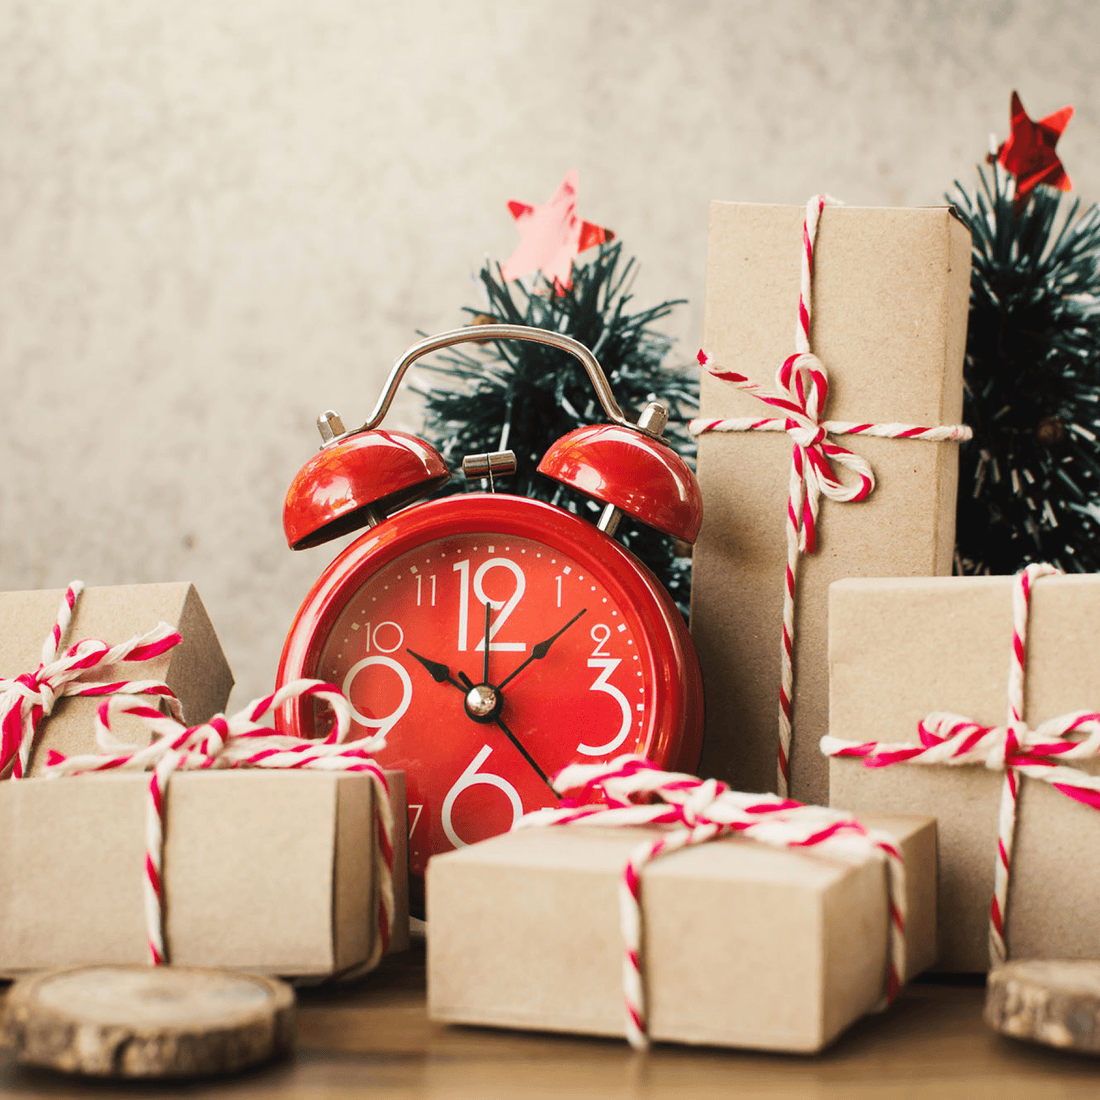 Red alarm clock among wrapped presents